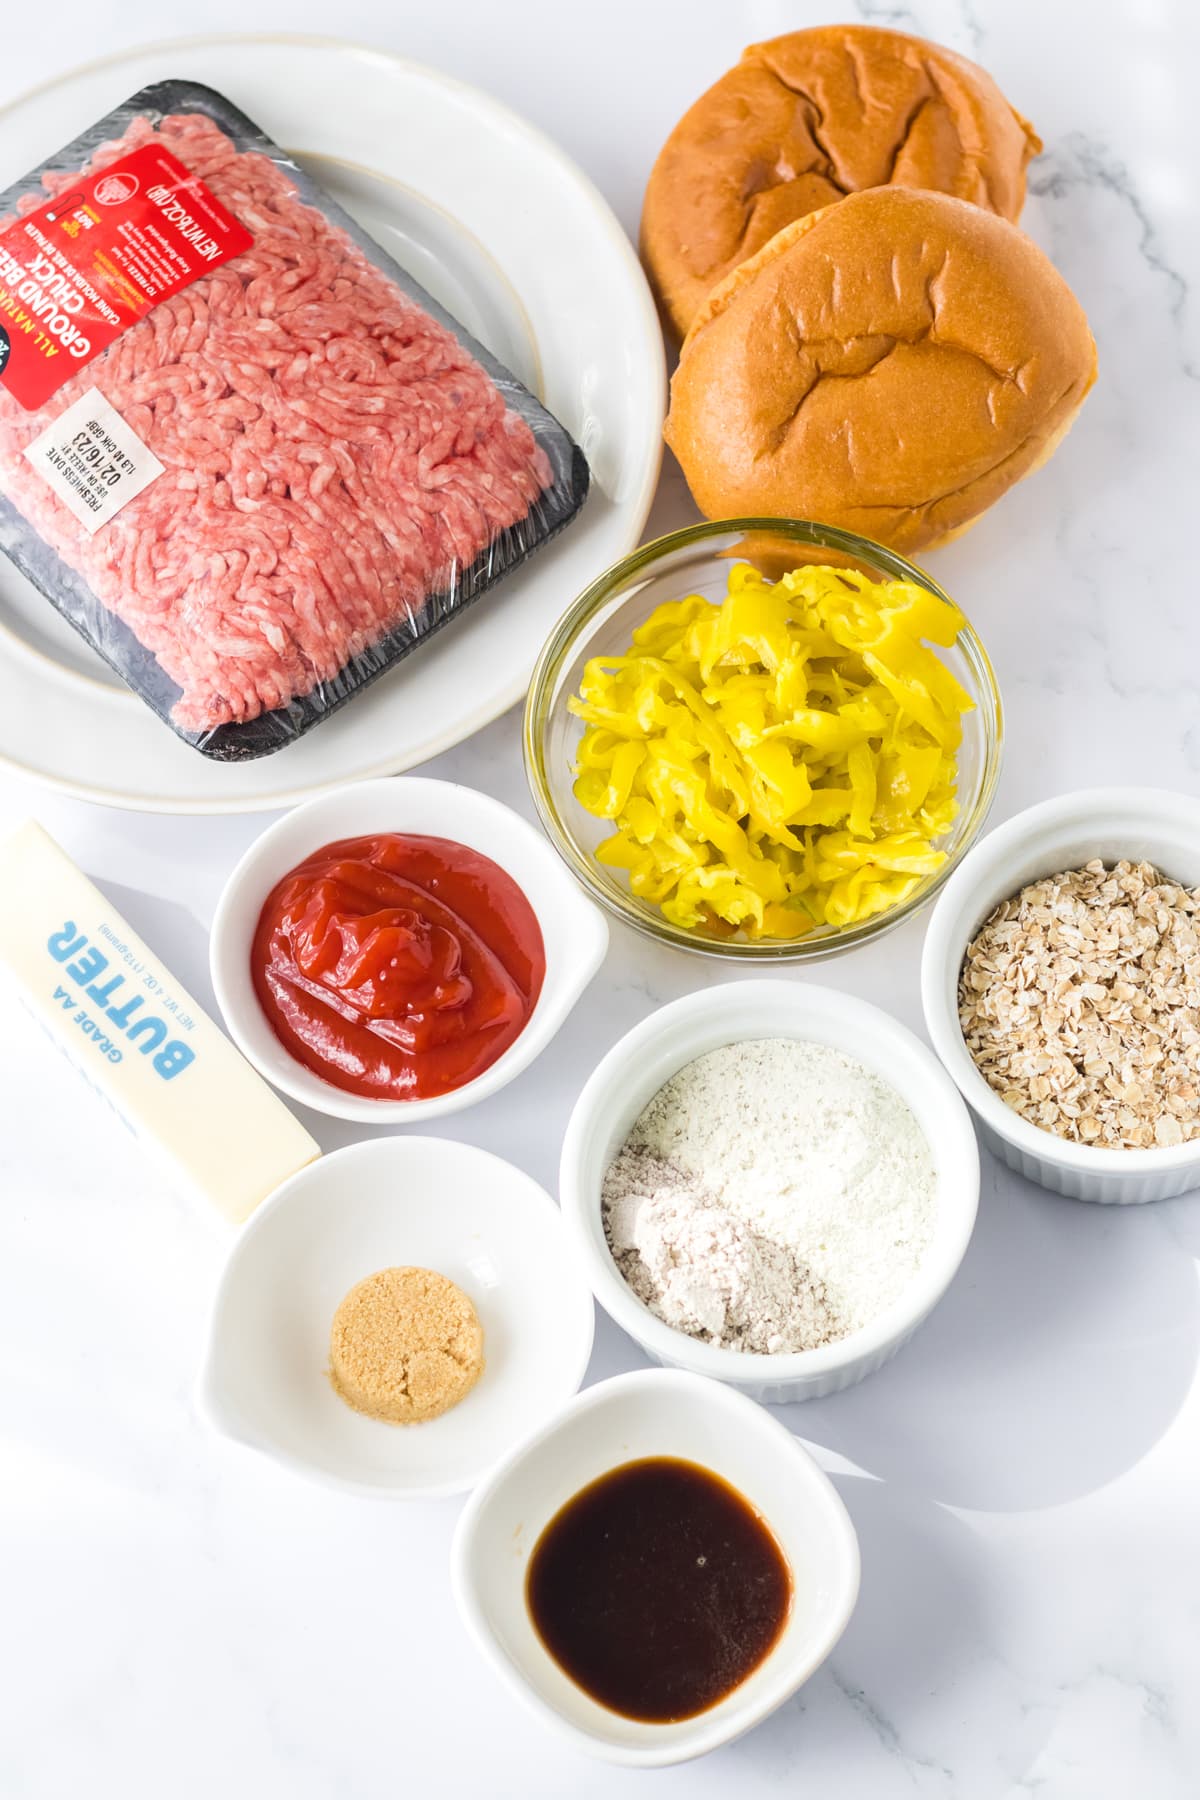 The ingredients for Slow Cooker Mississippi Sloppy Joes are the following: Lean ground beef, Ranch dressing mix, Brown gravy mix, Sliced pepperoncini peppers, Quick cooking oatmeal, Ketchup, Water, Pepperoncini juice, Worcestershire sauce, Brown sugar, Butter and Sandwich buns